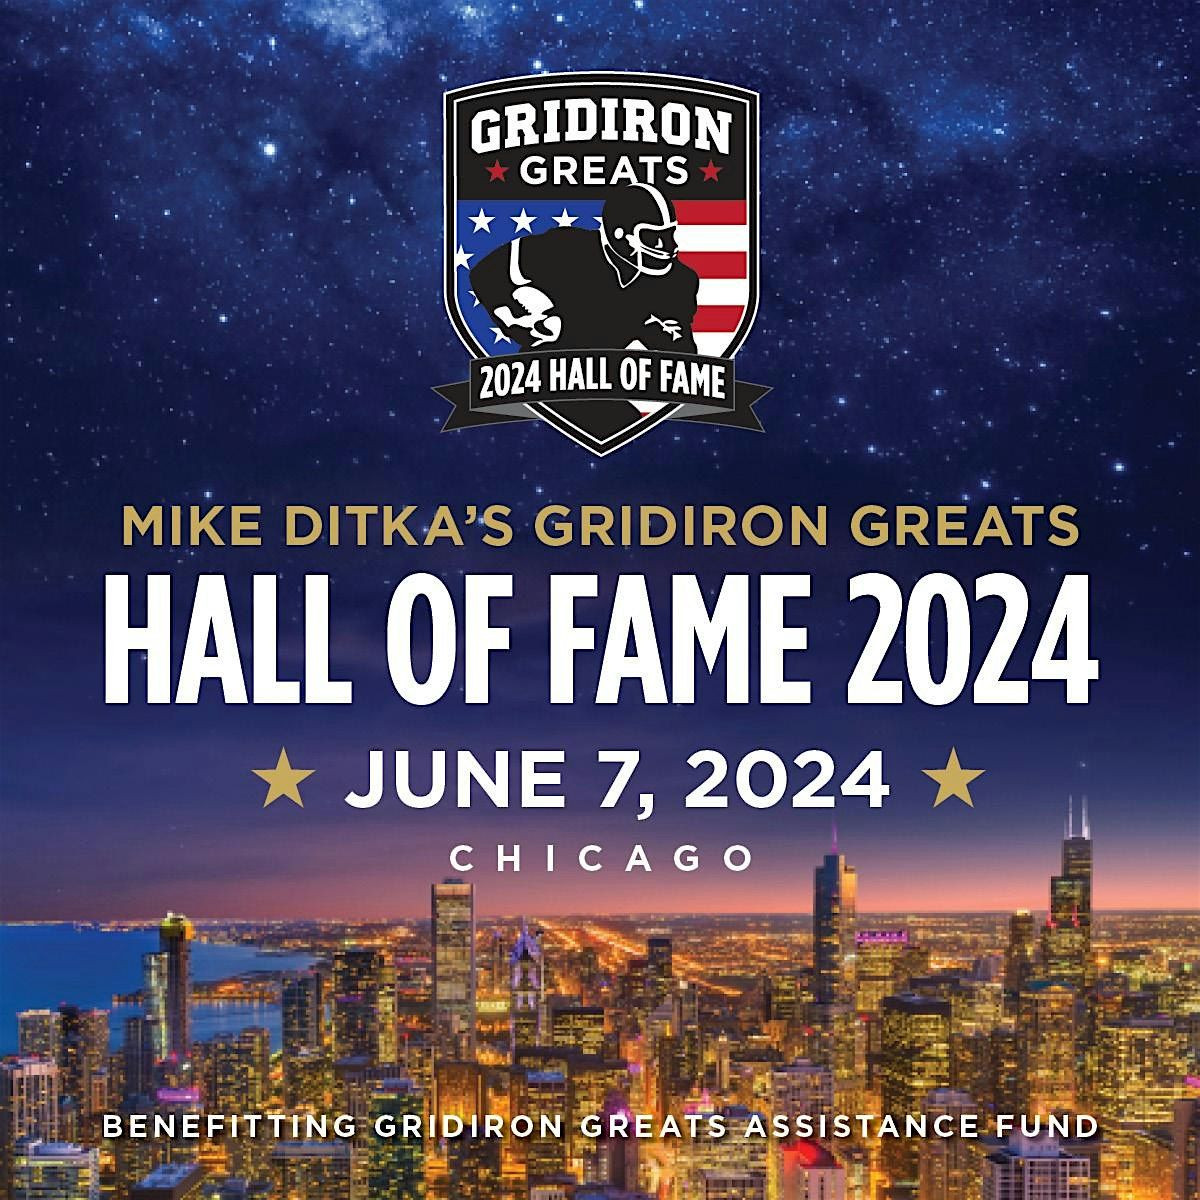 Mike Ditka's Gridiron Greats Hall of Fame Gala Chicago 2024